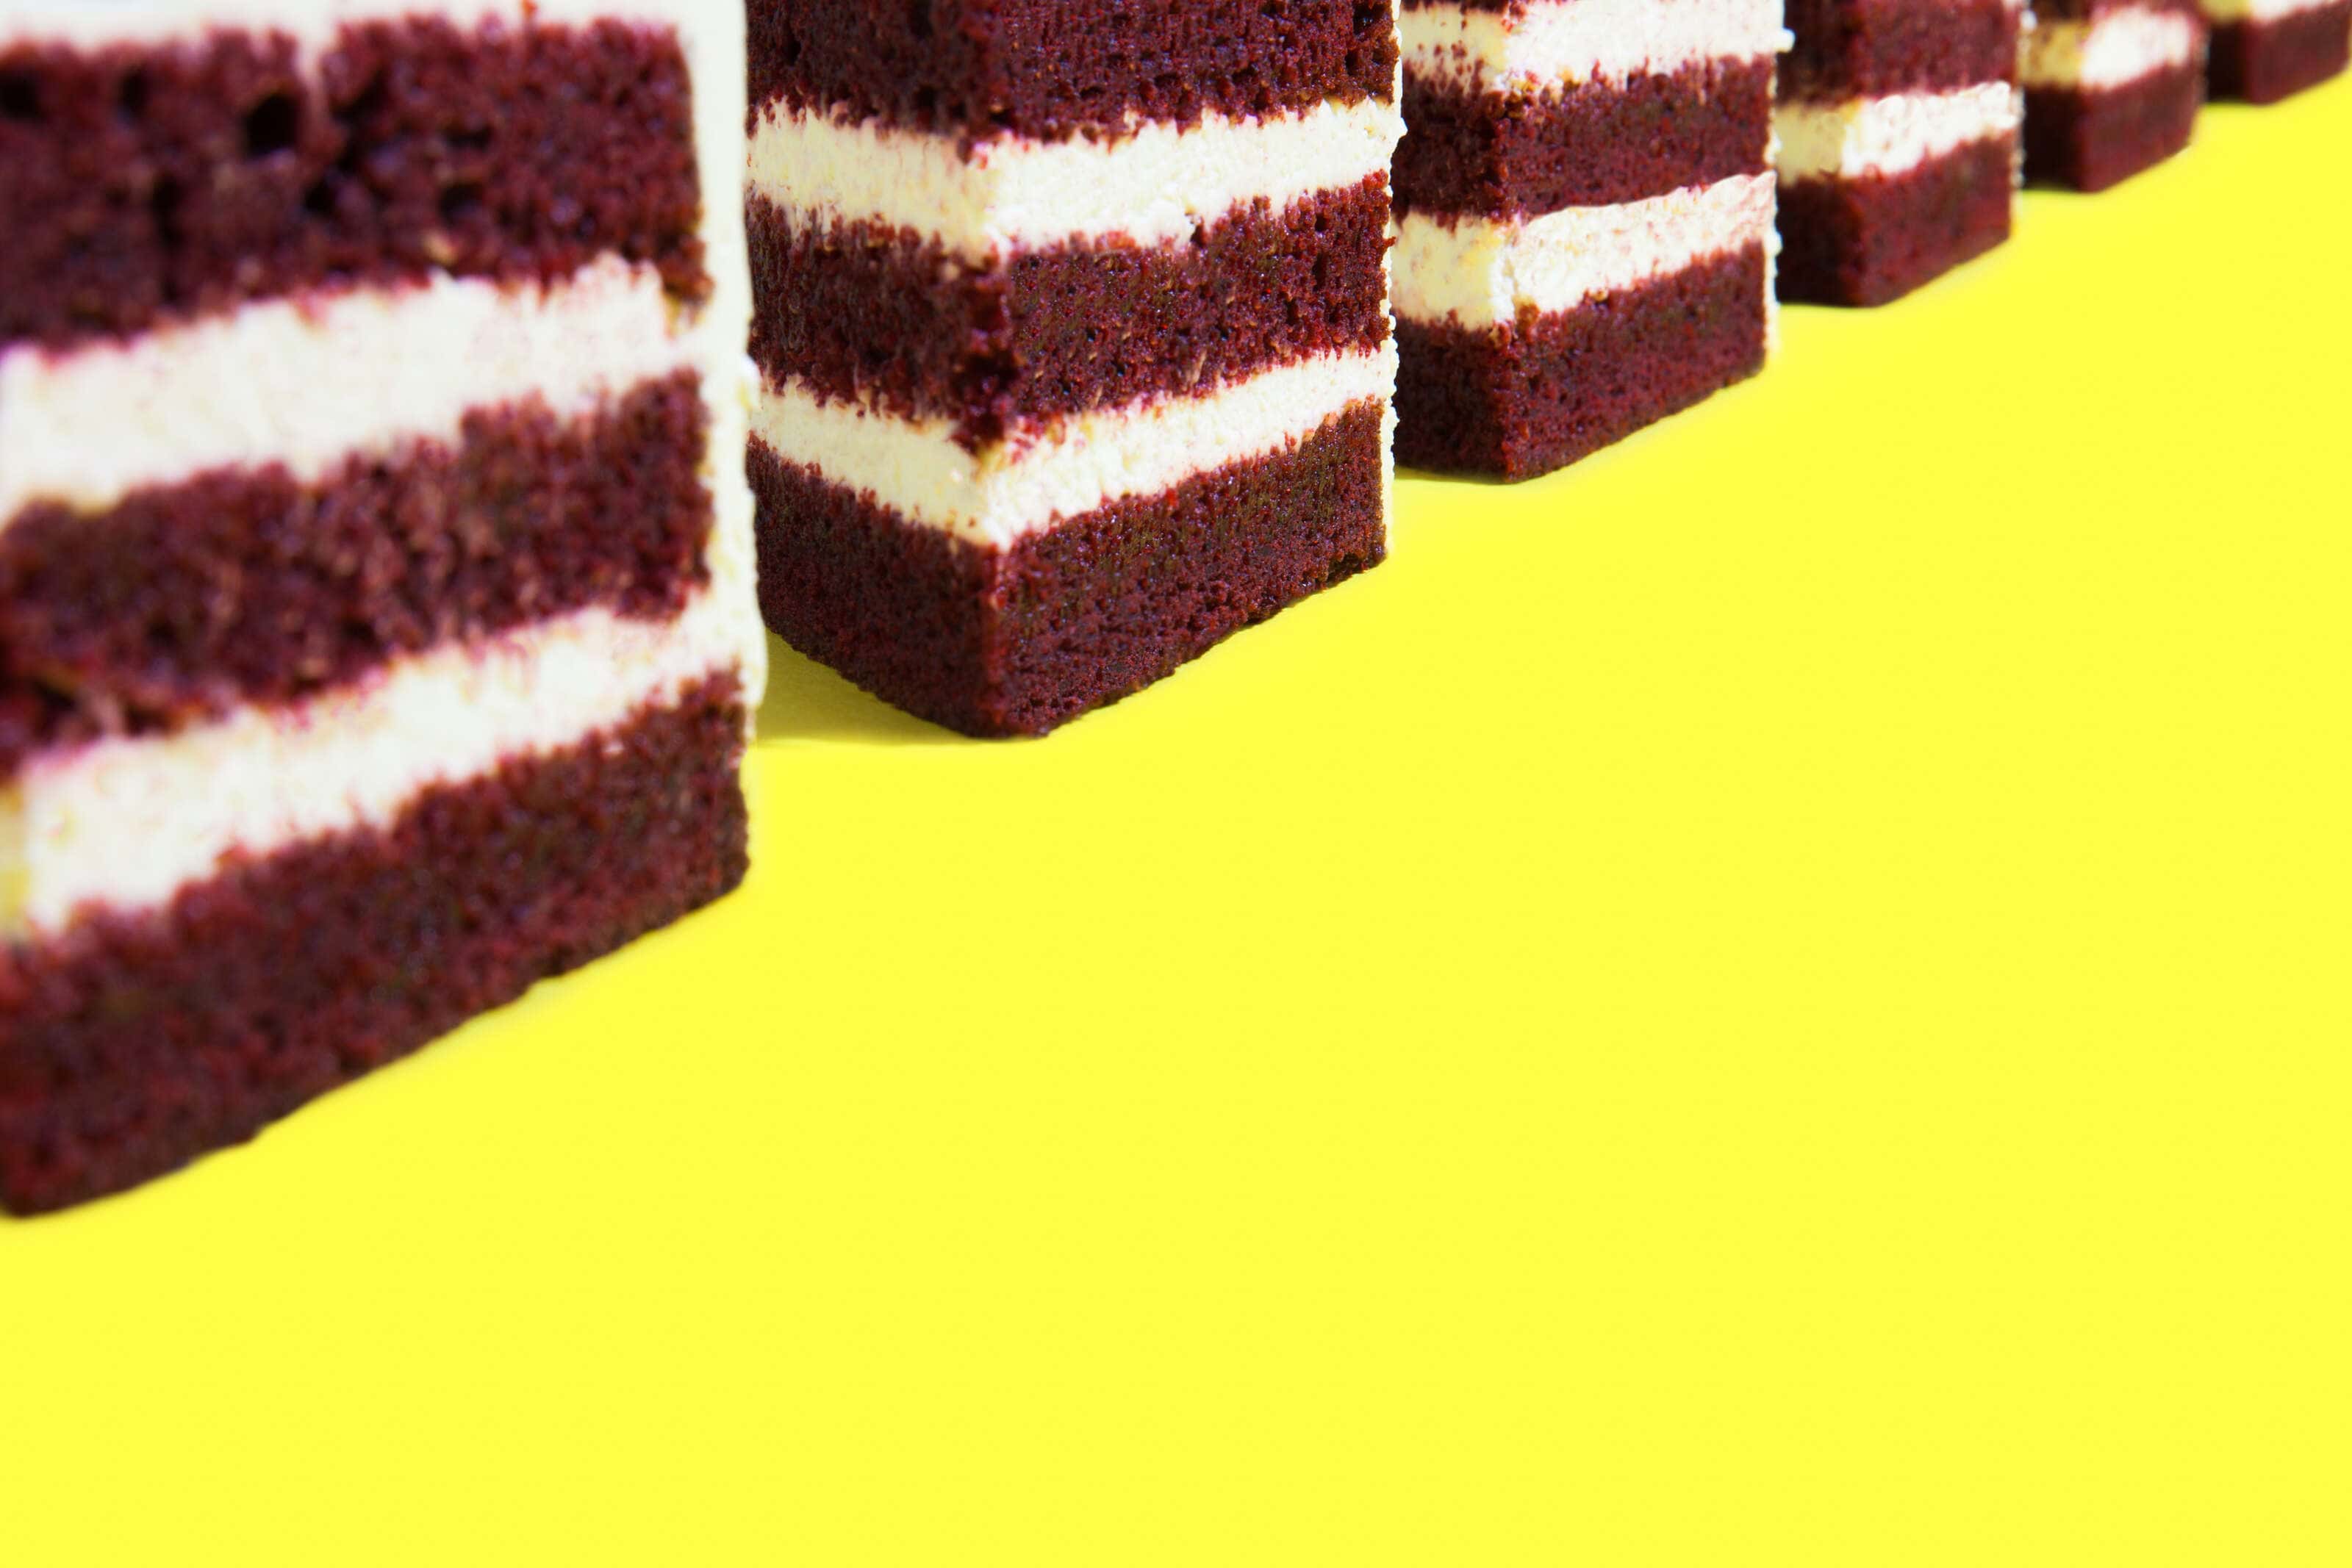 Red Velvet Cake photographed on a vivid yellow background in a Pop Art Style.